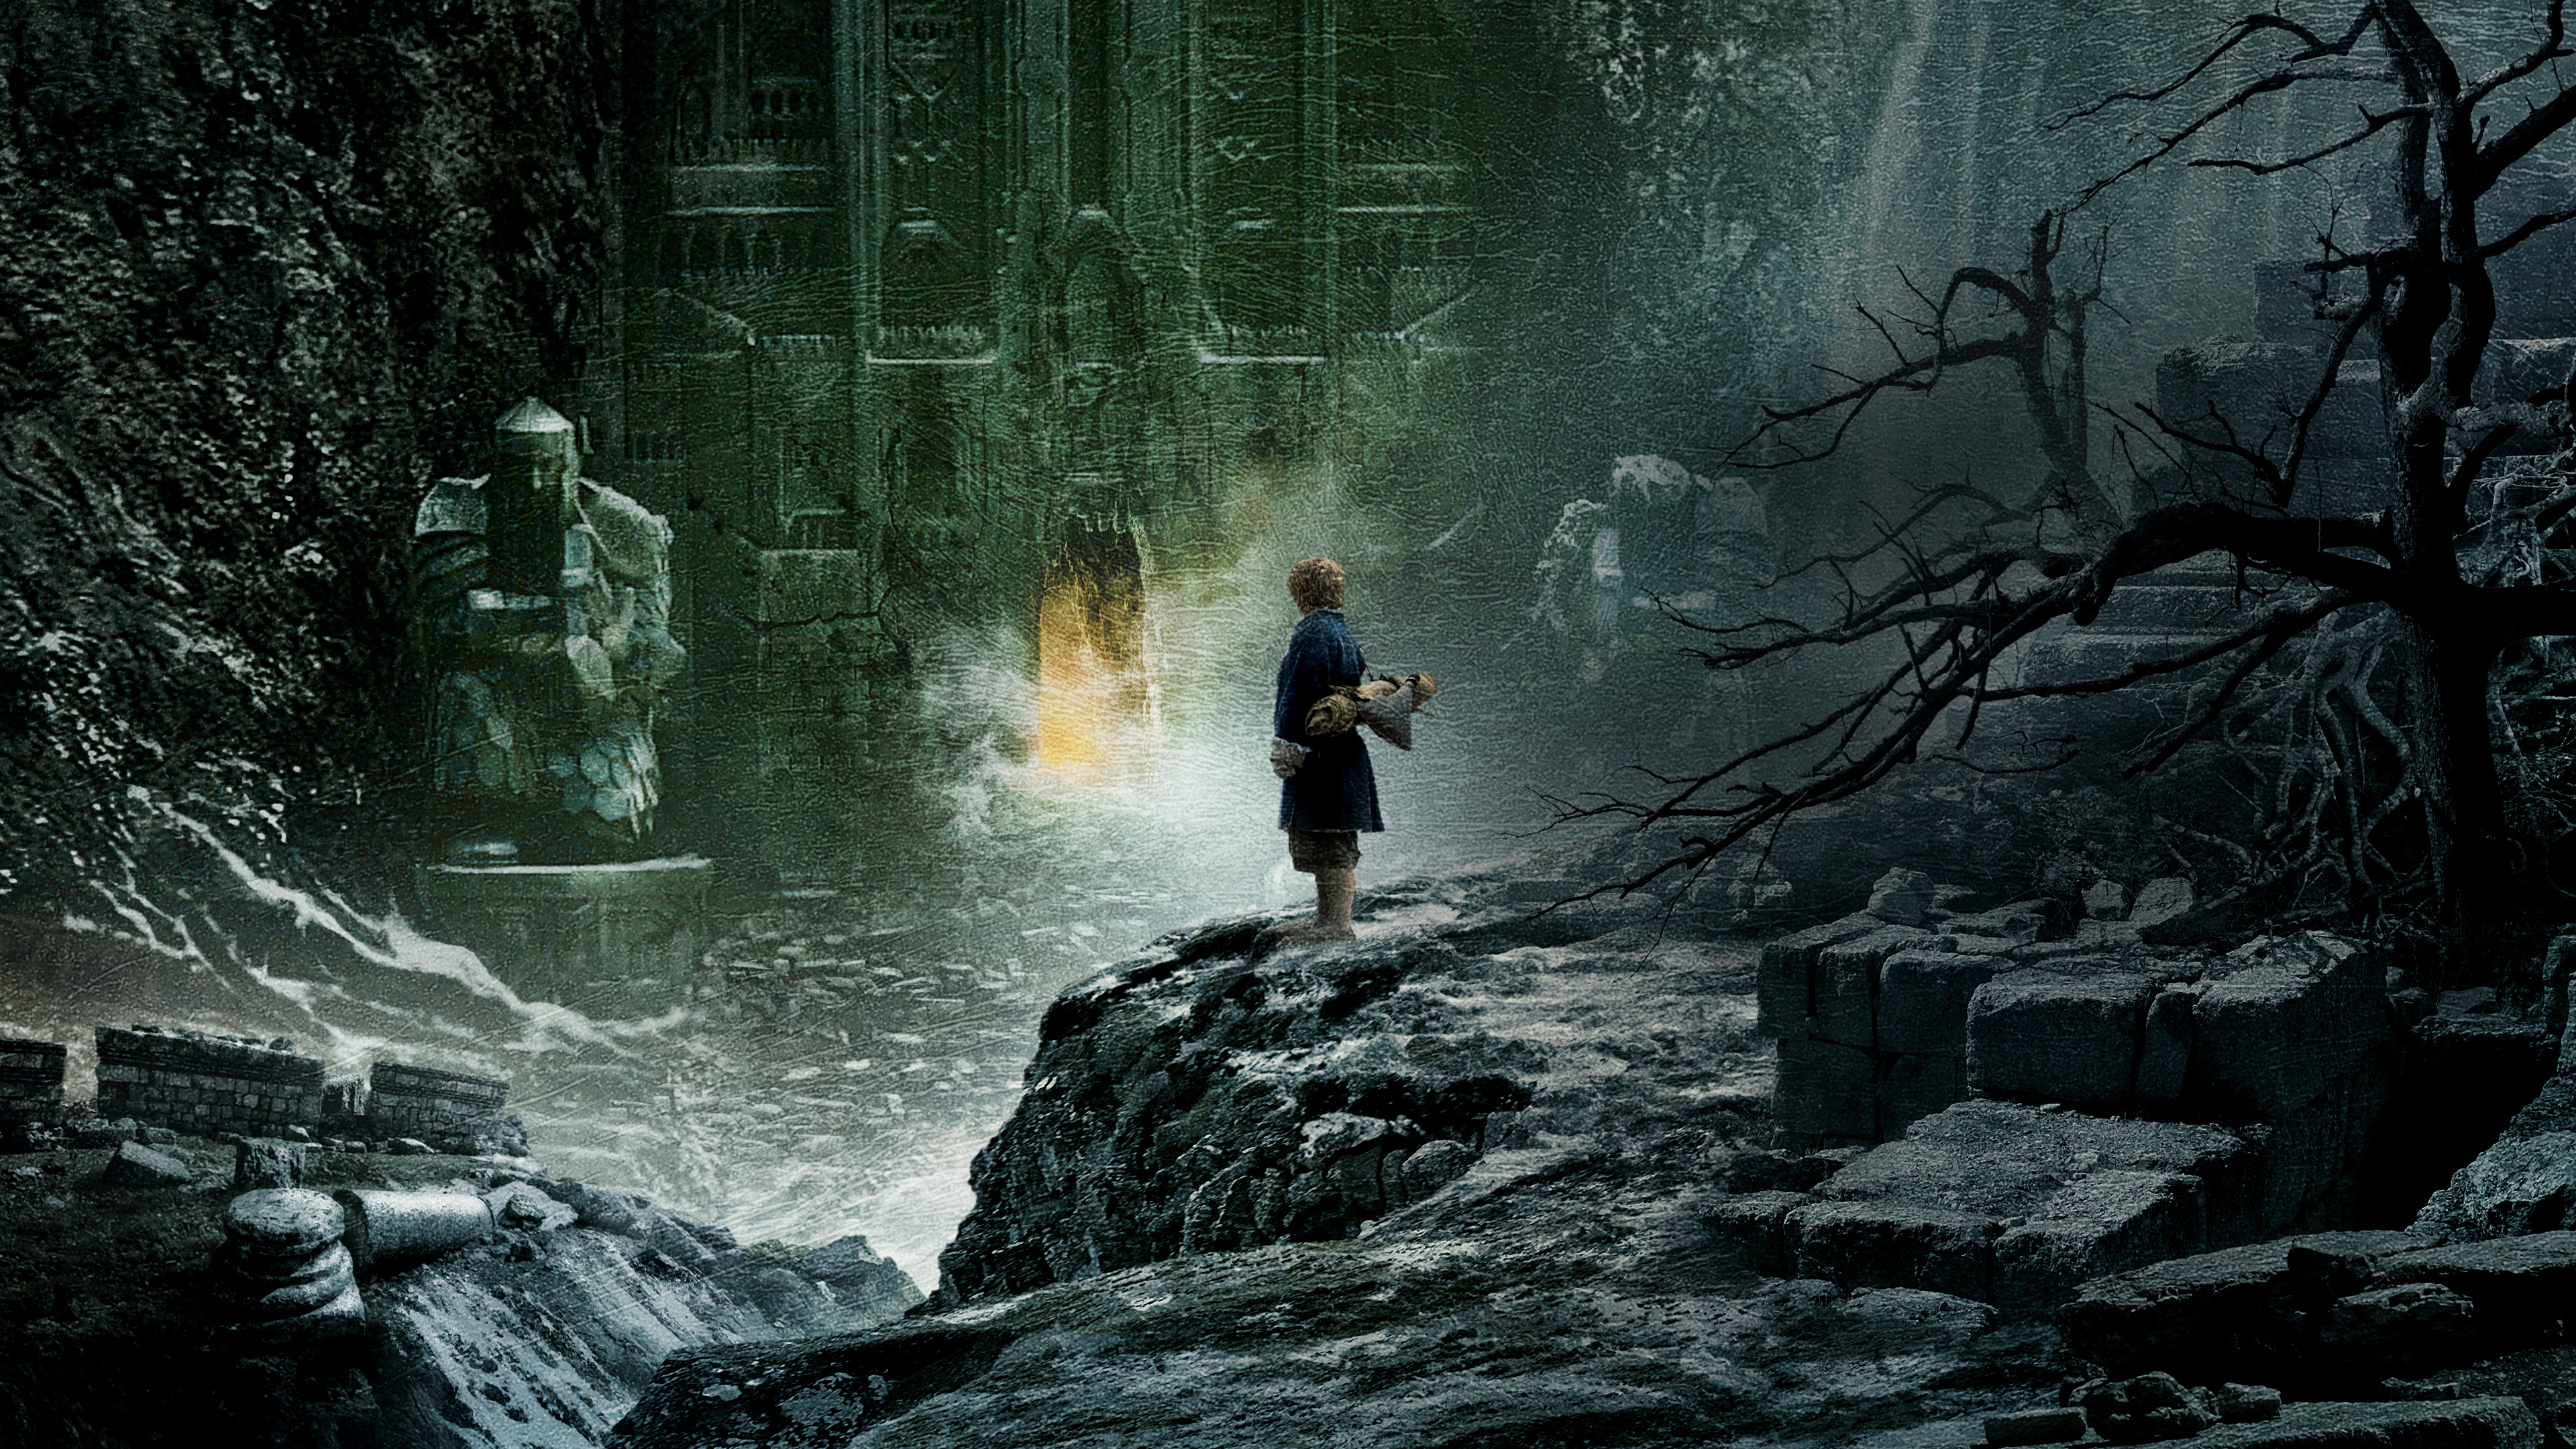 The Hobbit (Movie): The Desolation Of Smaug, The sequel to 2012's An Unexpected Journey. 3840x2160 4K Wallpaper.